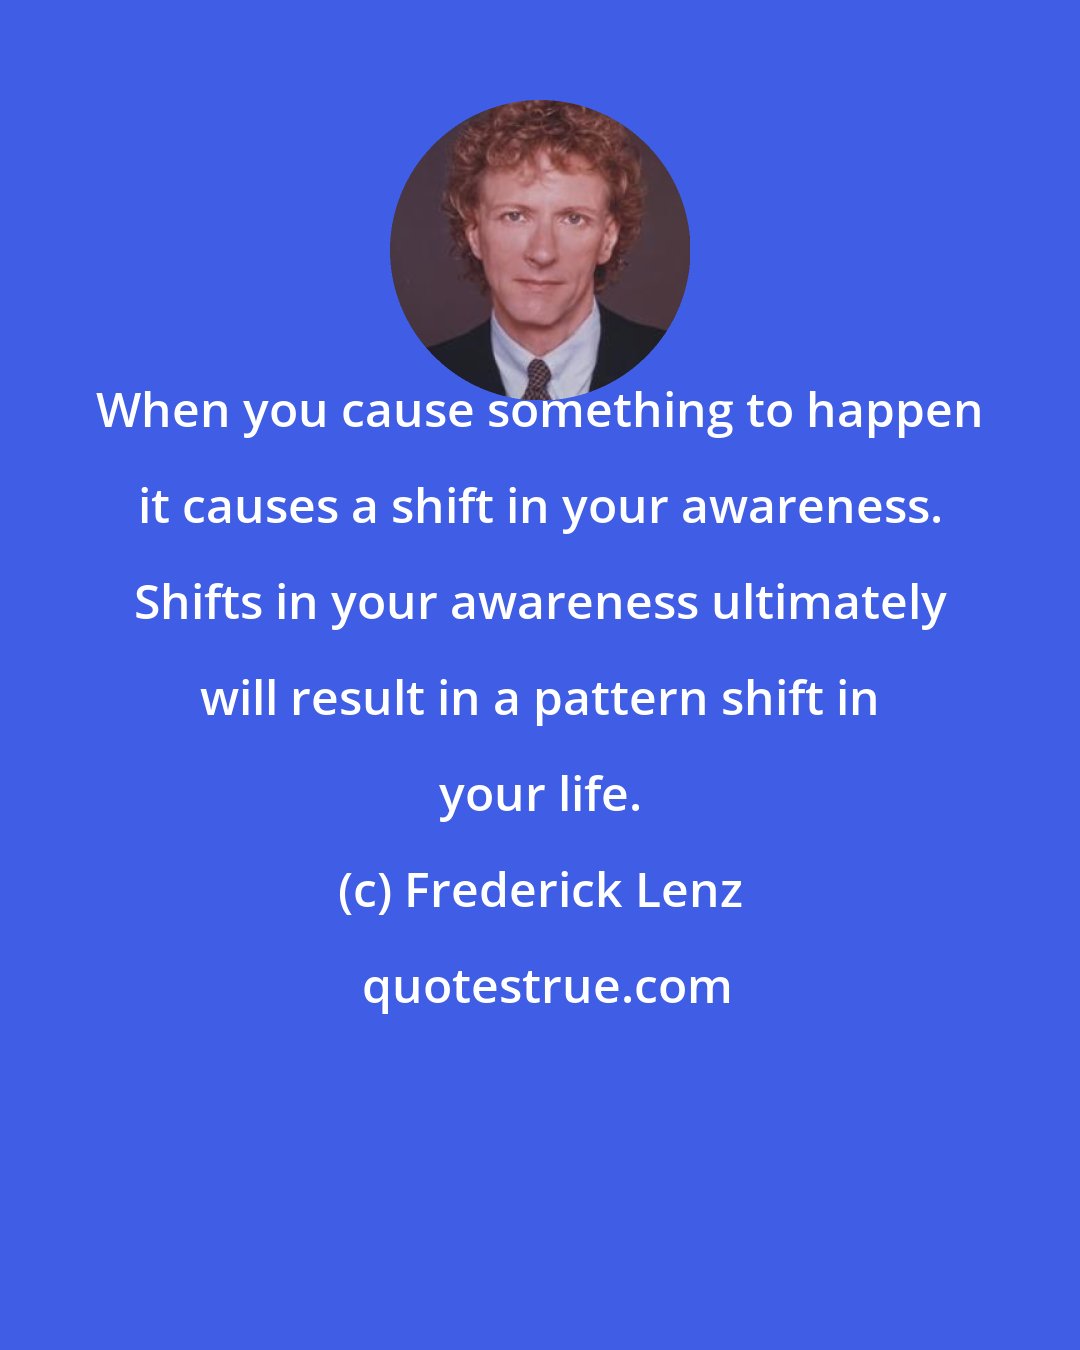 Frederick Lenz: When you cause something to happen it causes a shift in your awareness. Shifts in your awareness ultimately will result in a pattern shift in your life.